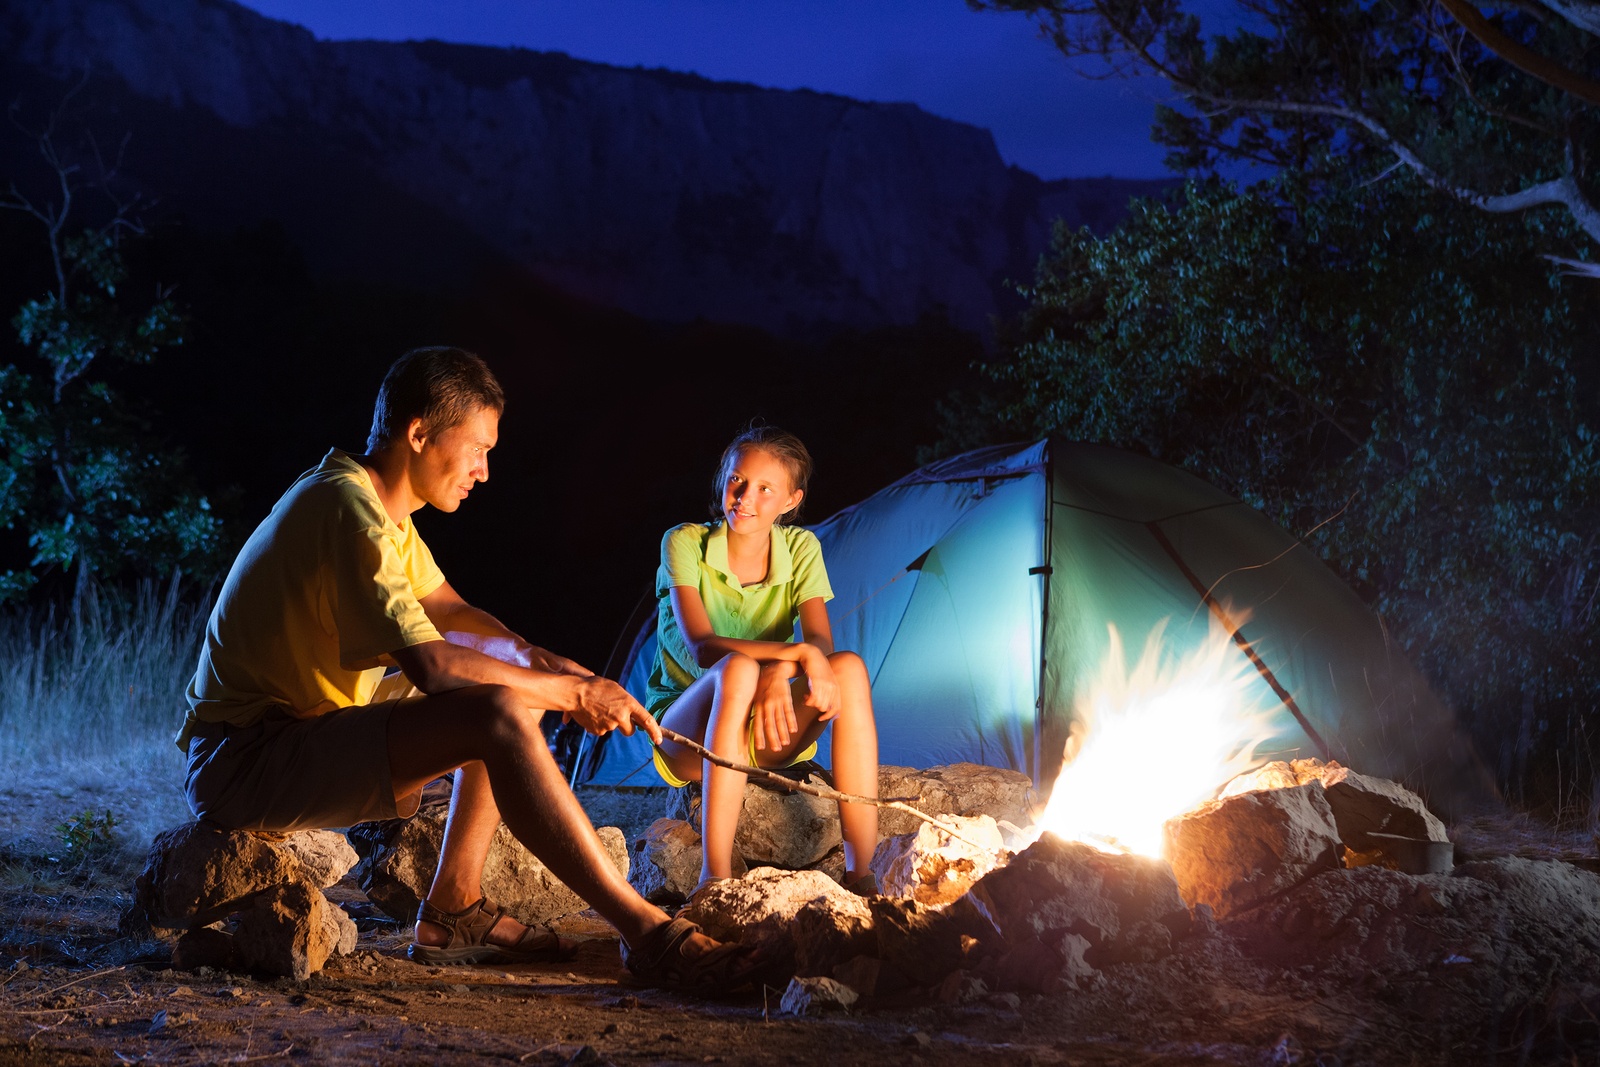 Couple in camping with campfire at night